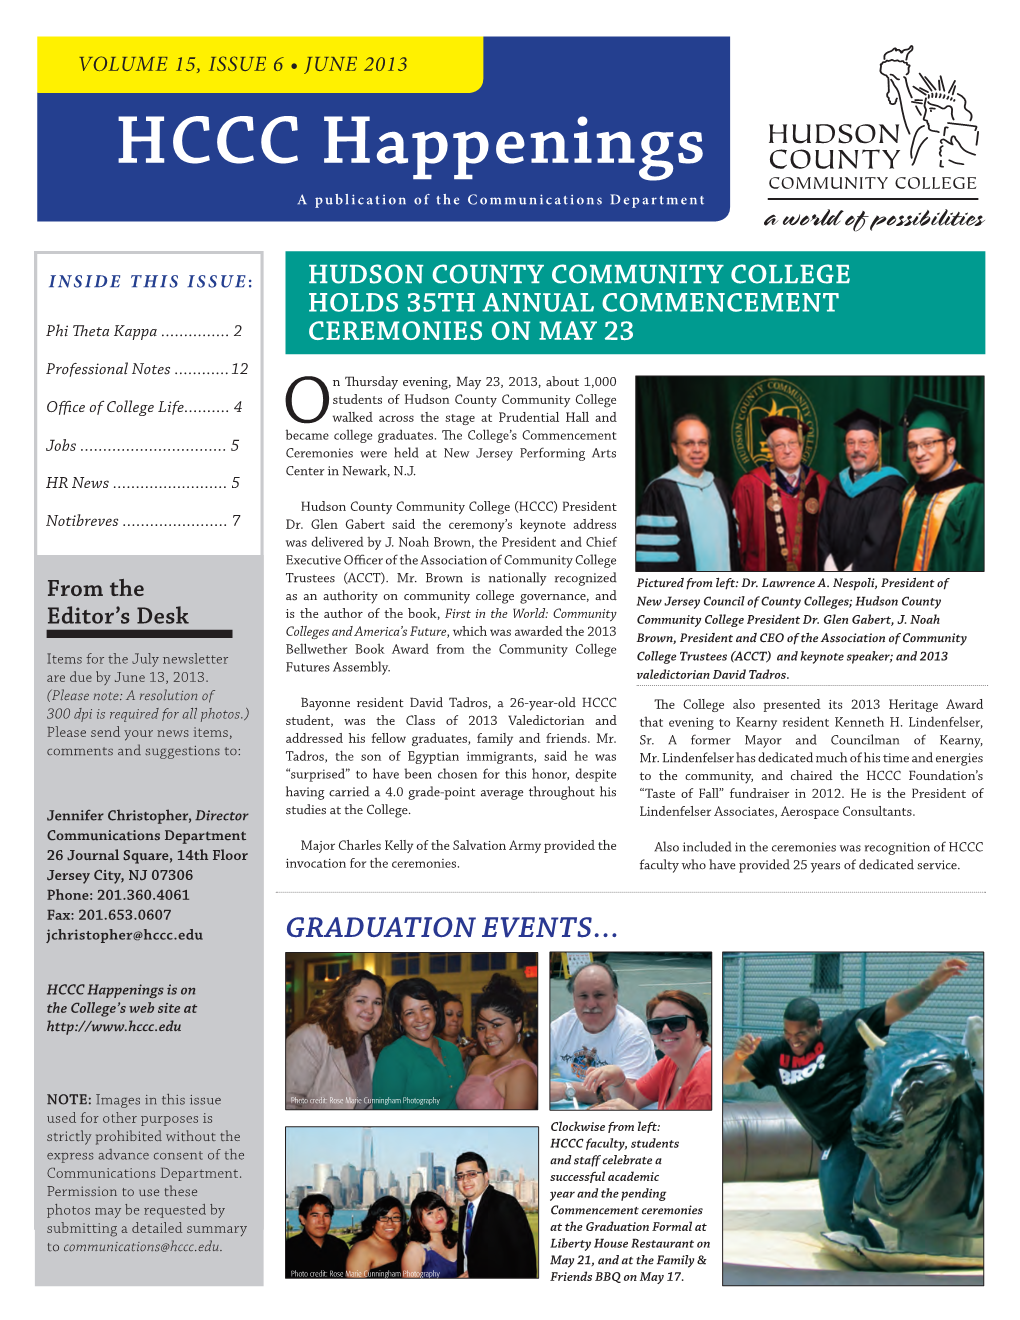 JUNE 2013 HCCC Happenings a Publication of the Communications Department